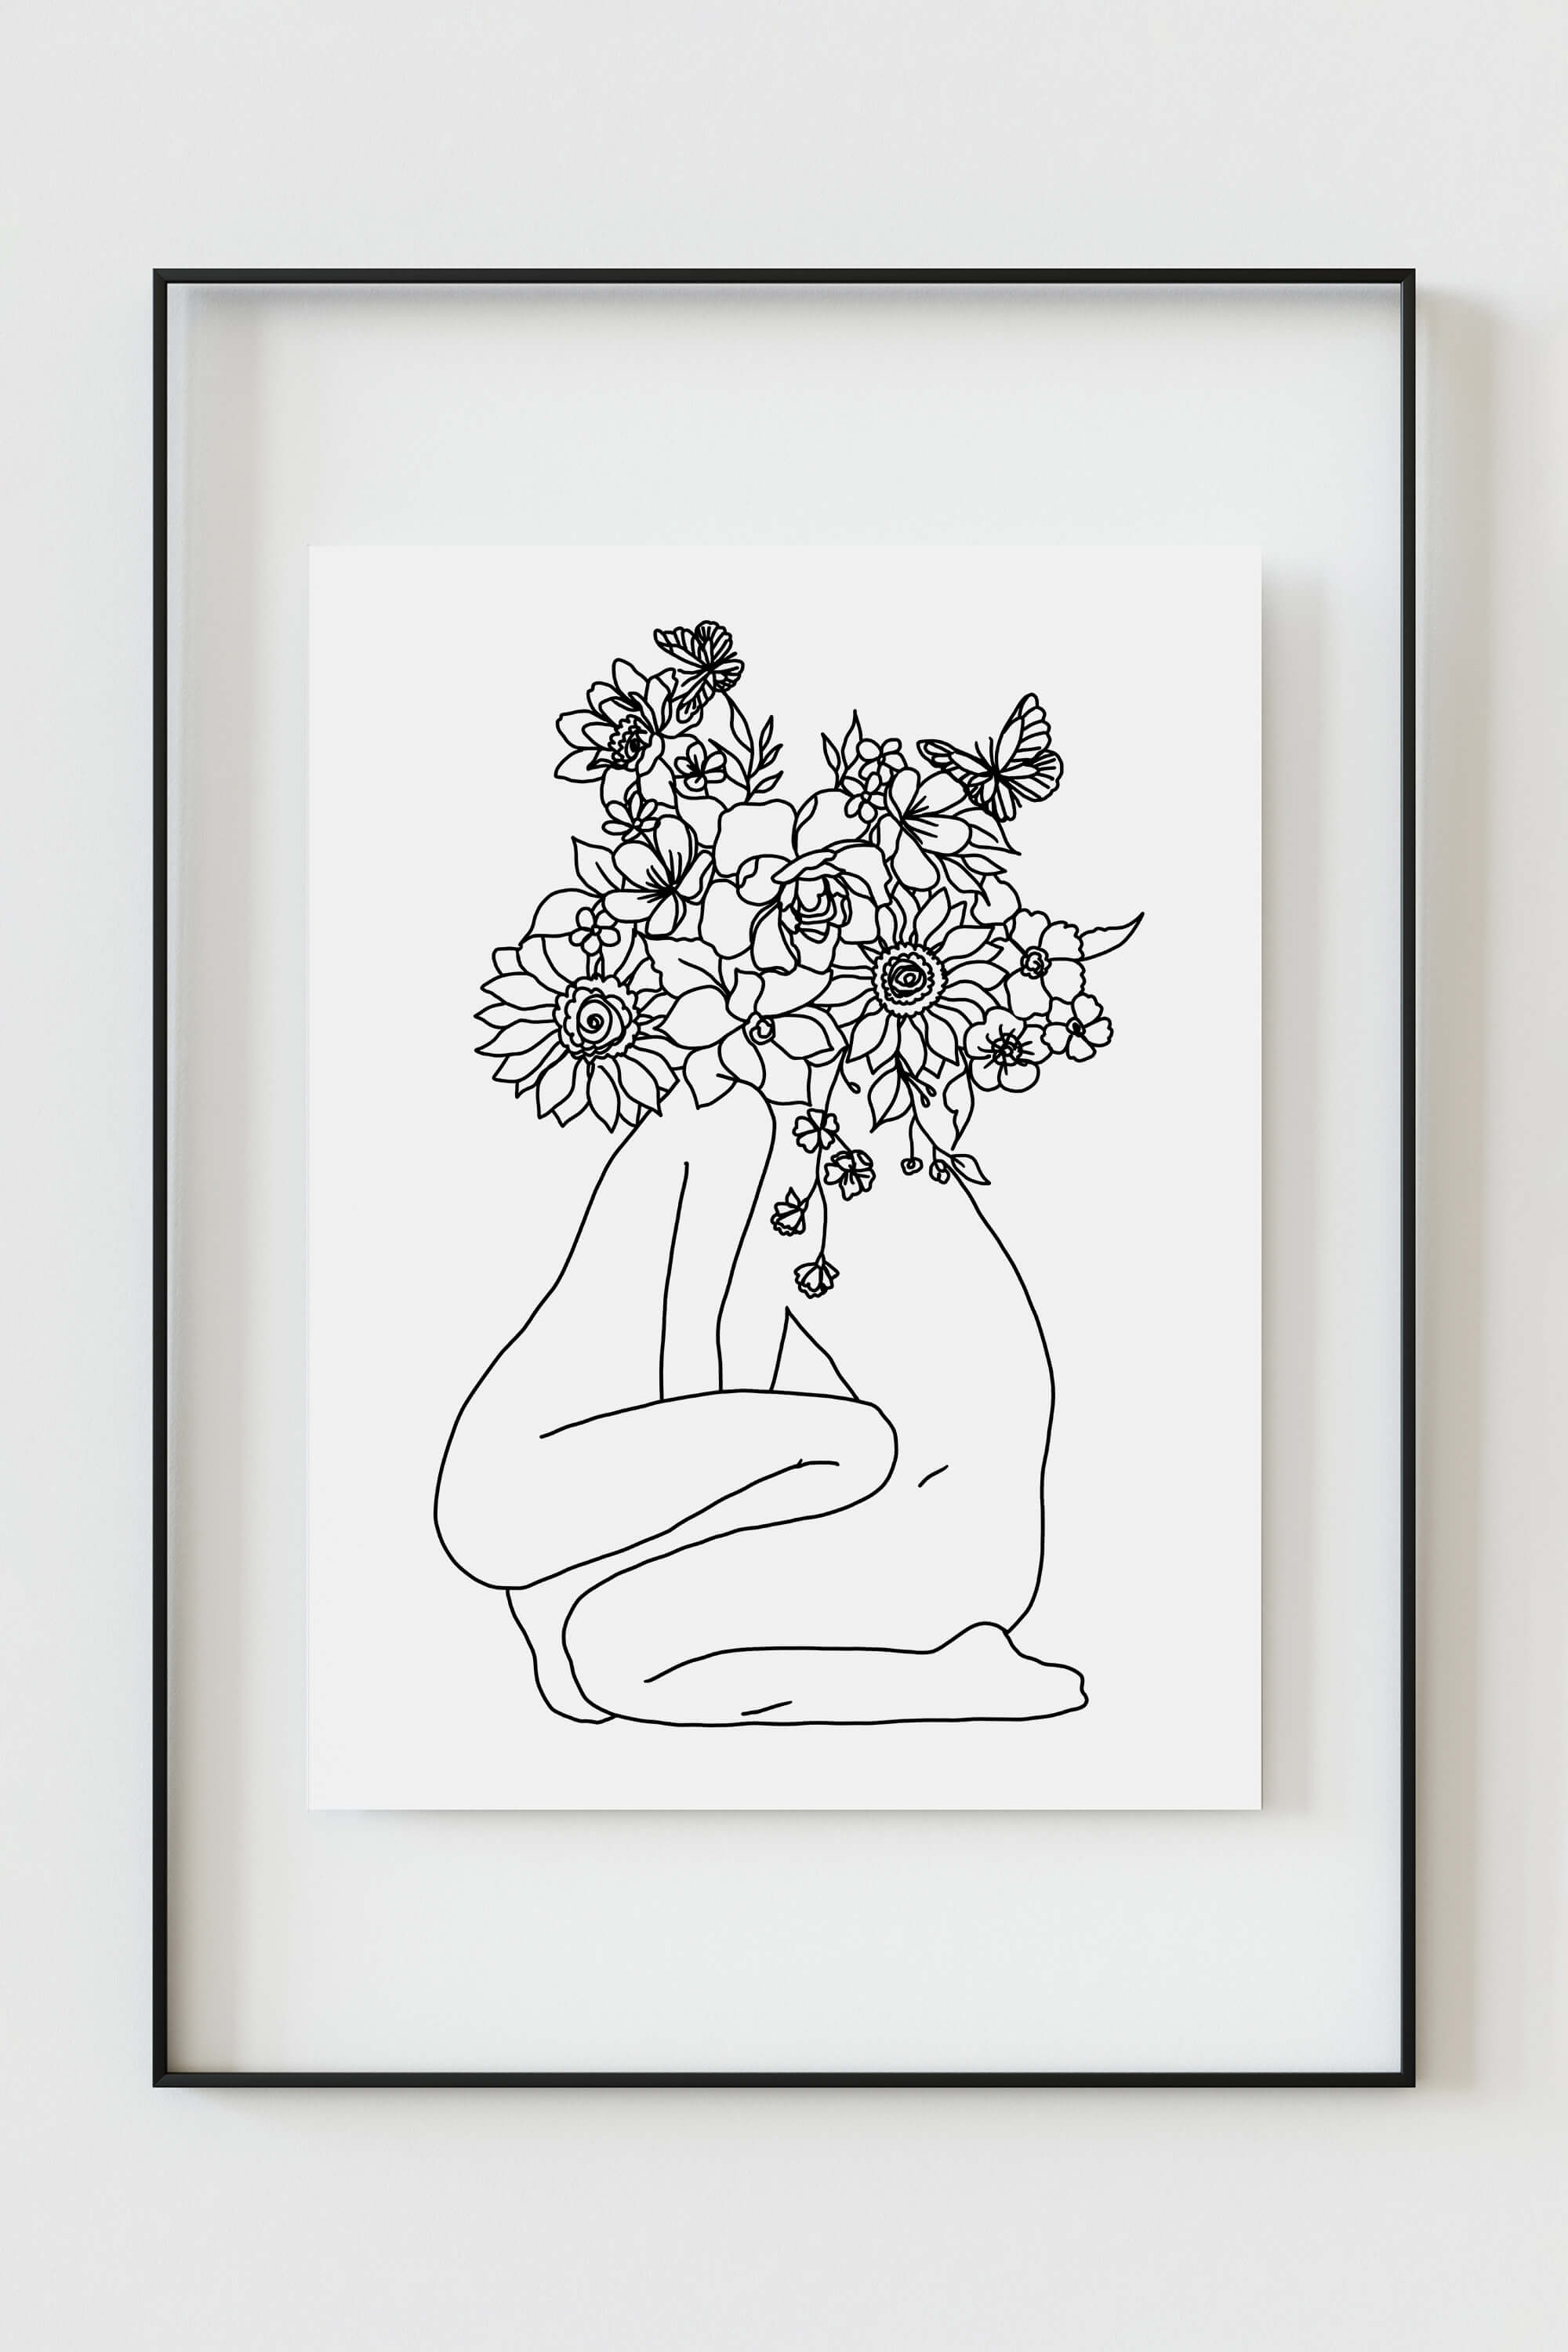 Sensual and sophisticated, this art print showcases the curves of a woman's body in exquisite line art.